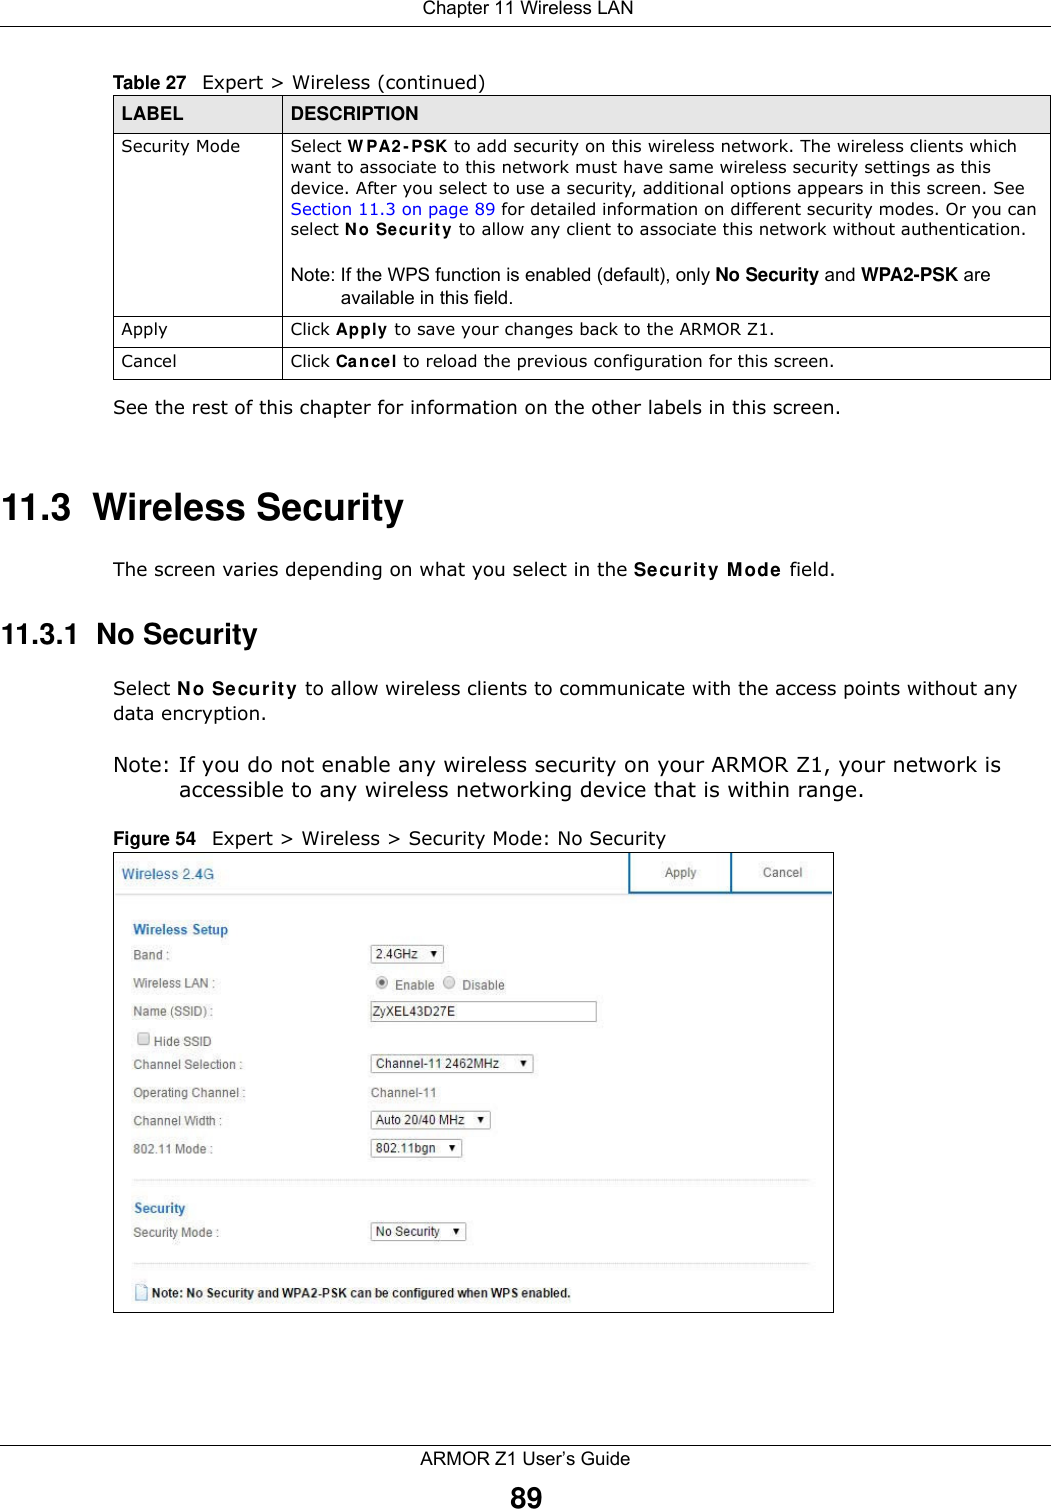  Chapter 11 Wireless LANARMOR Z1 User’s Guide89See the rest of this chapter for information on the other labels in this screen. 11.3  Wireless SecurityThe screen varies depending on what you select in the Security Mode field.11.3.1  No SecuritySelect No Security to allow wireless clients to communicate with the access points without any data encryption.Note: If you do not enable any wireless security on your ARMOR Z1, your network is accessible to any wireless networking device that is within range.Figure 54   Expert &gt; Wireless &gt; Security Mode: No SecuritySecurity Mode Select WPA2-PSK to add security on this wireless network. The wireless clients which want to associate to this network must have same wireless security settings as this device. After you select to use a security, additional options appears in this screen. See Section 11.3 on page 89 for detailed information on different security modes. Or you can select No Security to allow any client to associate this network without authentication.Note: If the WPS function is enabled (default), only No Security and WPA2-PSK are available in this field.Apply Click Apply to save your changes back to the ARMOR Z1.Cancel Click Cancel to reload the previous configuration for this screen.Table 27   Expert &gt; Wireless (continued) LABEL DESCRIPTION